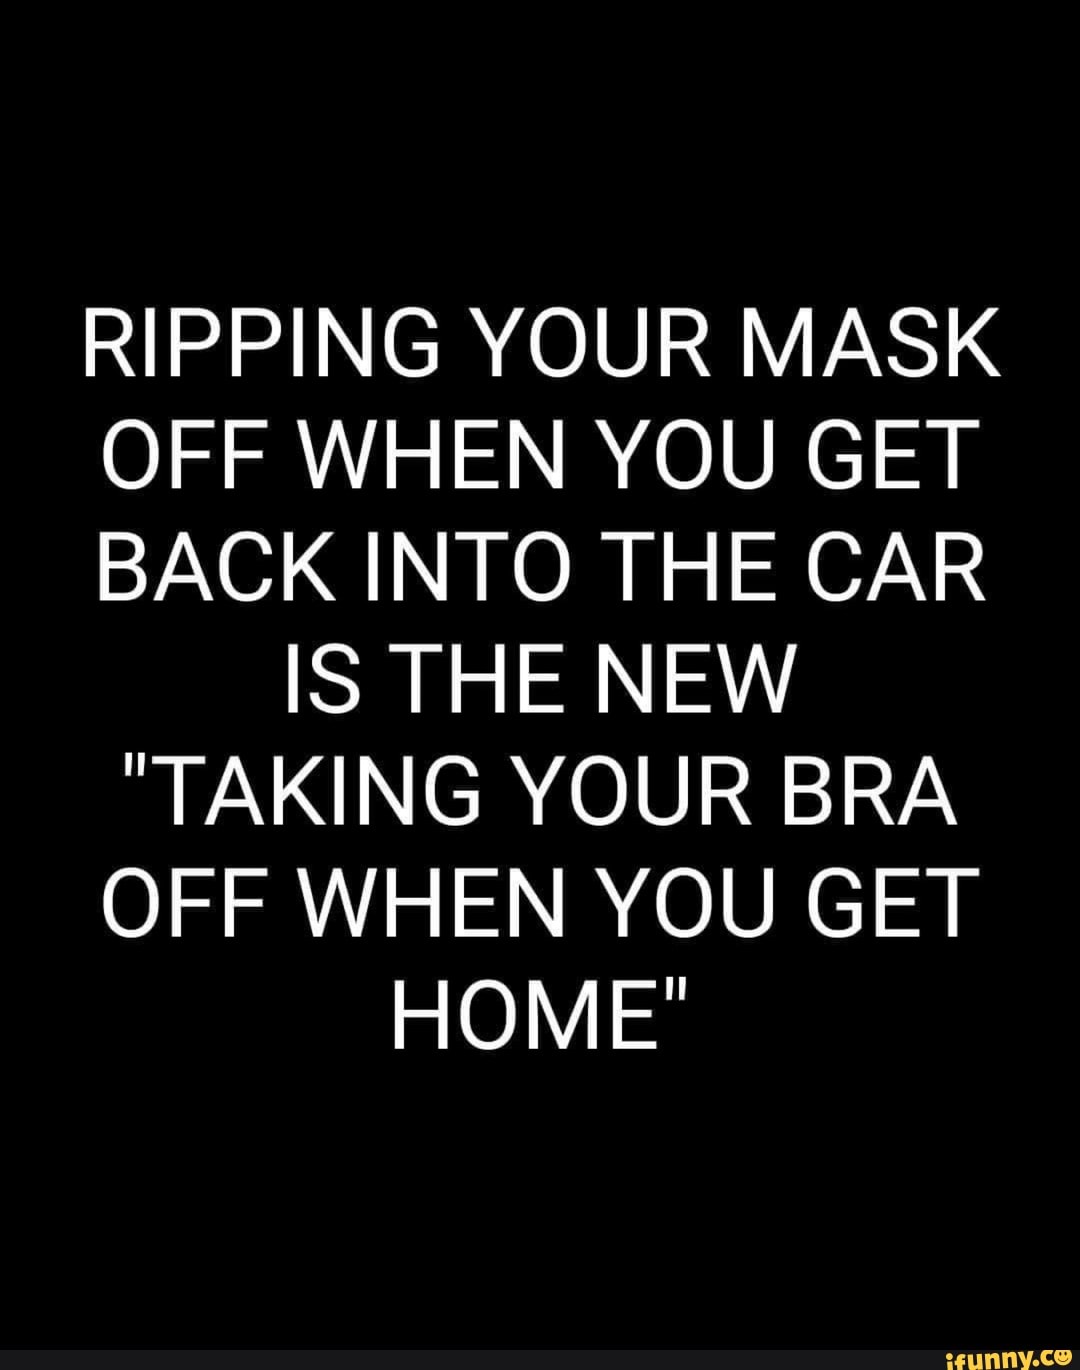 RIPPING YOUR MASK OFF WHEN YOU GET BACK INTO THE CAR IS THE NEW